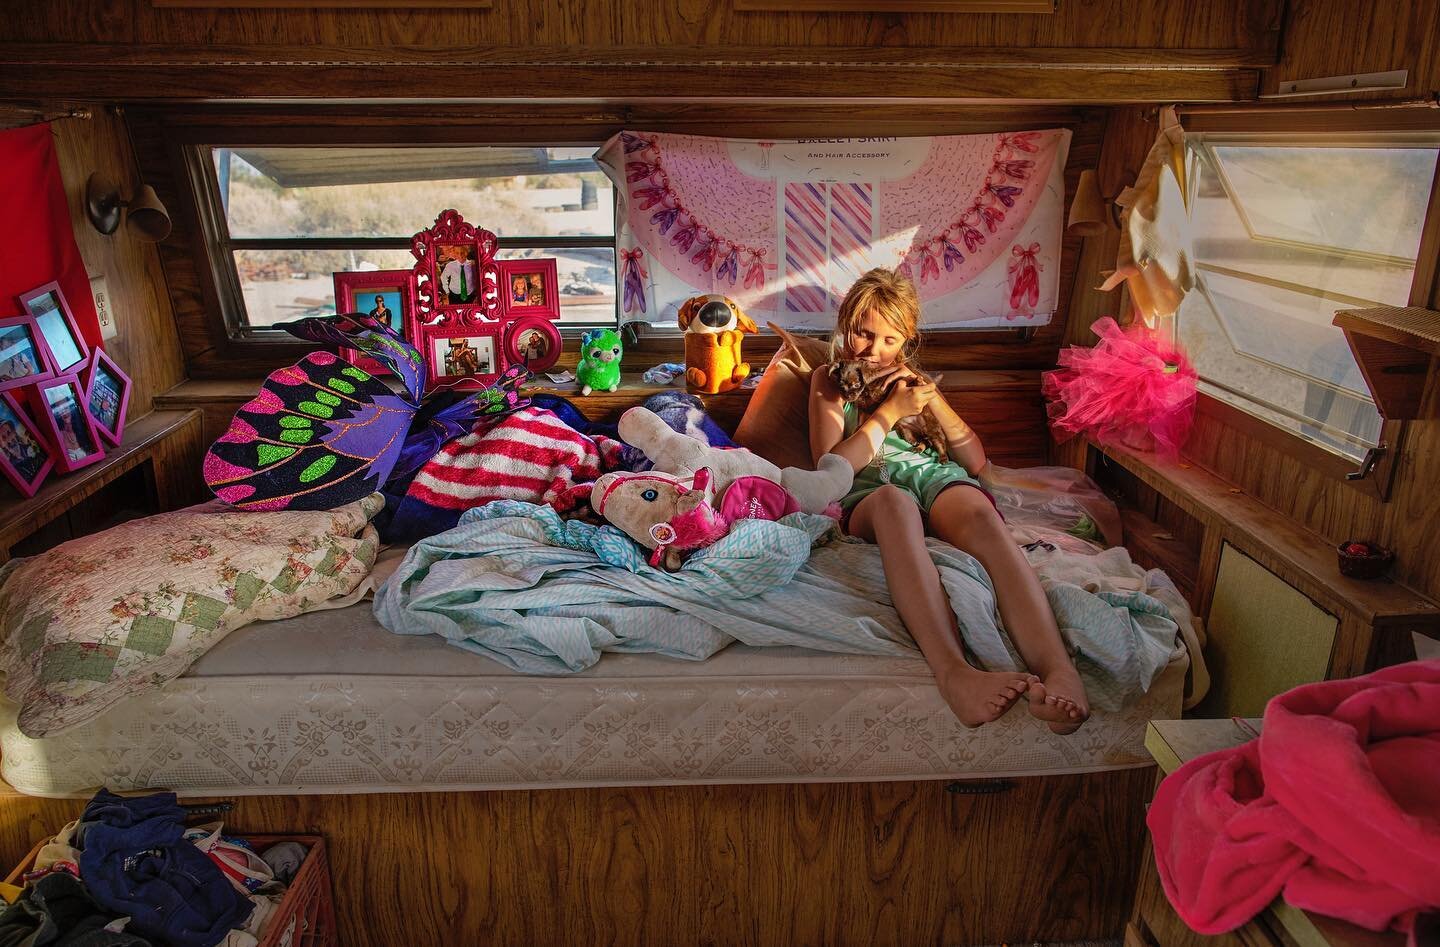 American Bedroom - Kasey age 7 &lsquo;My bedroom is a trailer. I sleep here with my puppy, only not when it&rsquo;s too hot.&rsquo; Slab City, California #americanbedroom  #childhood  #slabcity  #slabcitycalifornia  #lifeinslabcity  #photography  #yo